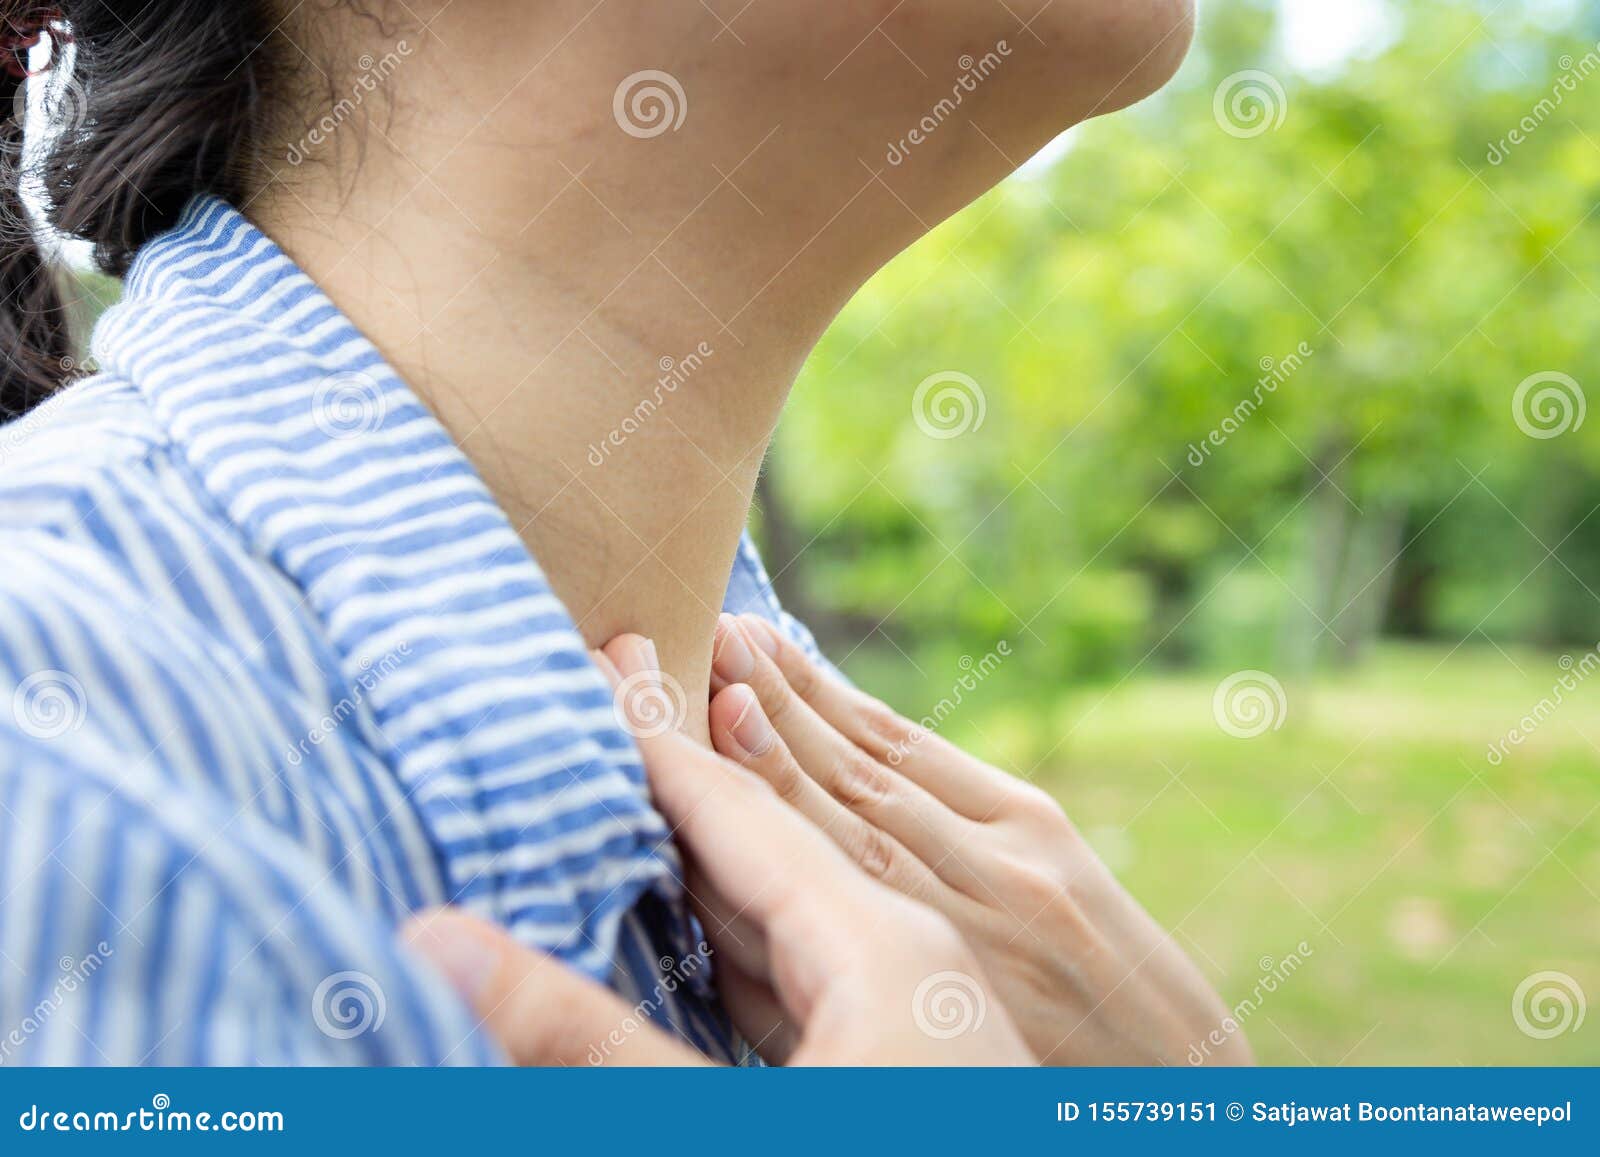 sick woman suffering from sore throat,painful swallowing,tonsillitis,irritation,asian female patient checking thyroid gland by